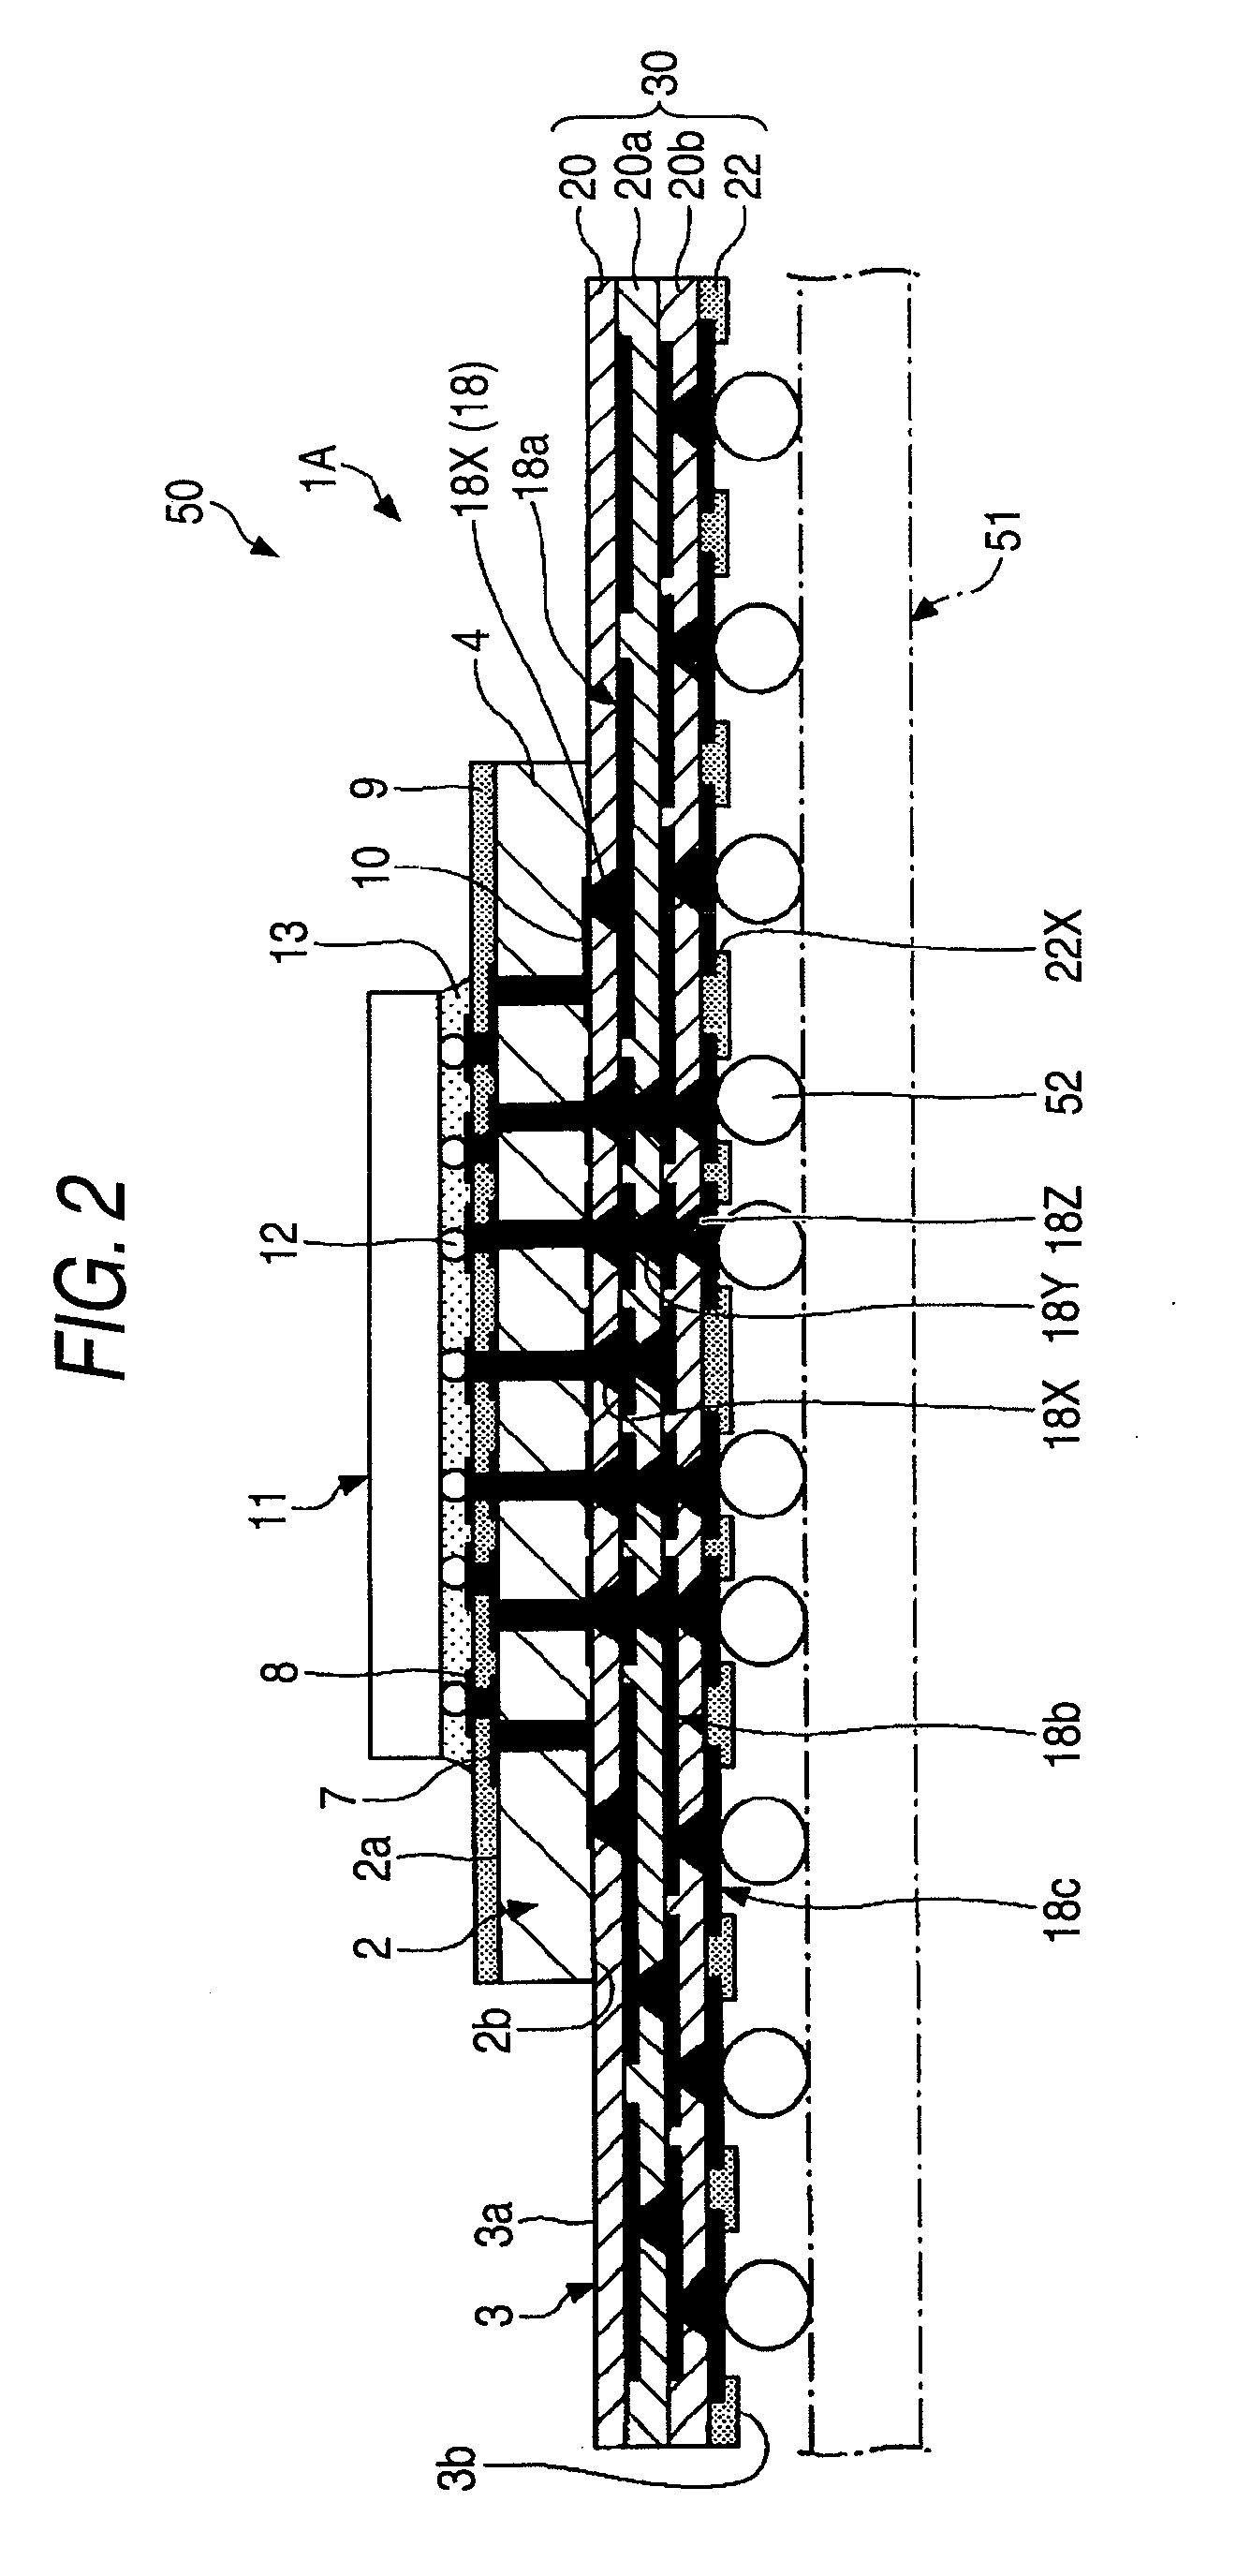 Wiring board, semiconductor device having wiring board, and method of manufacturing wiring board